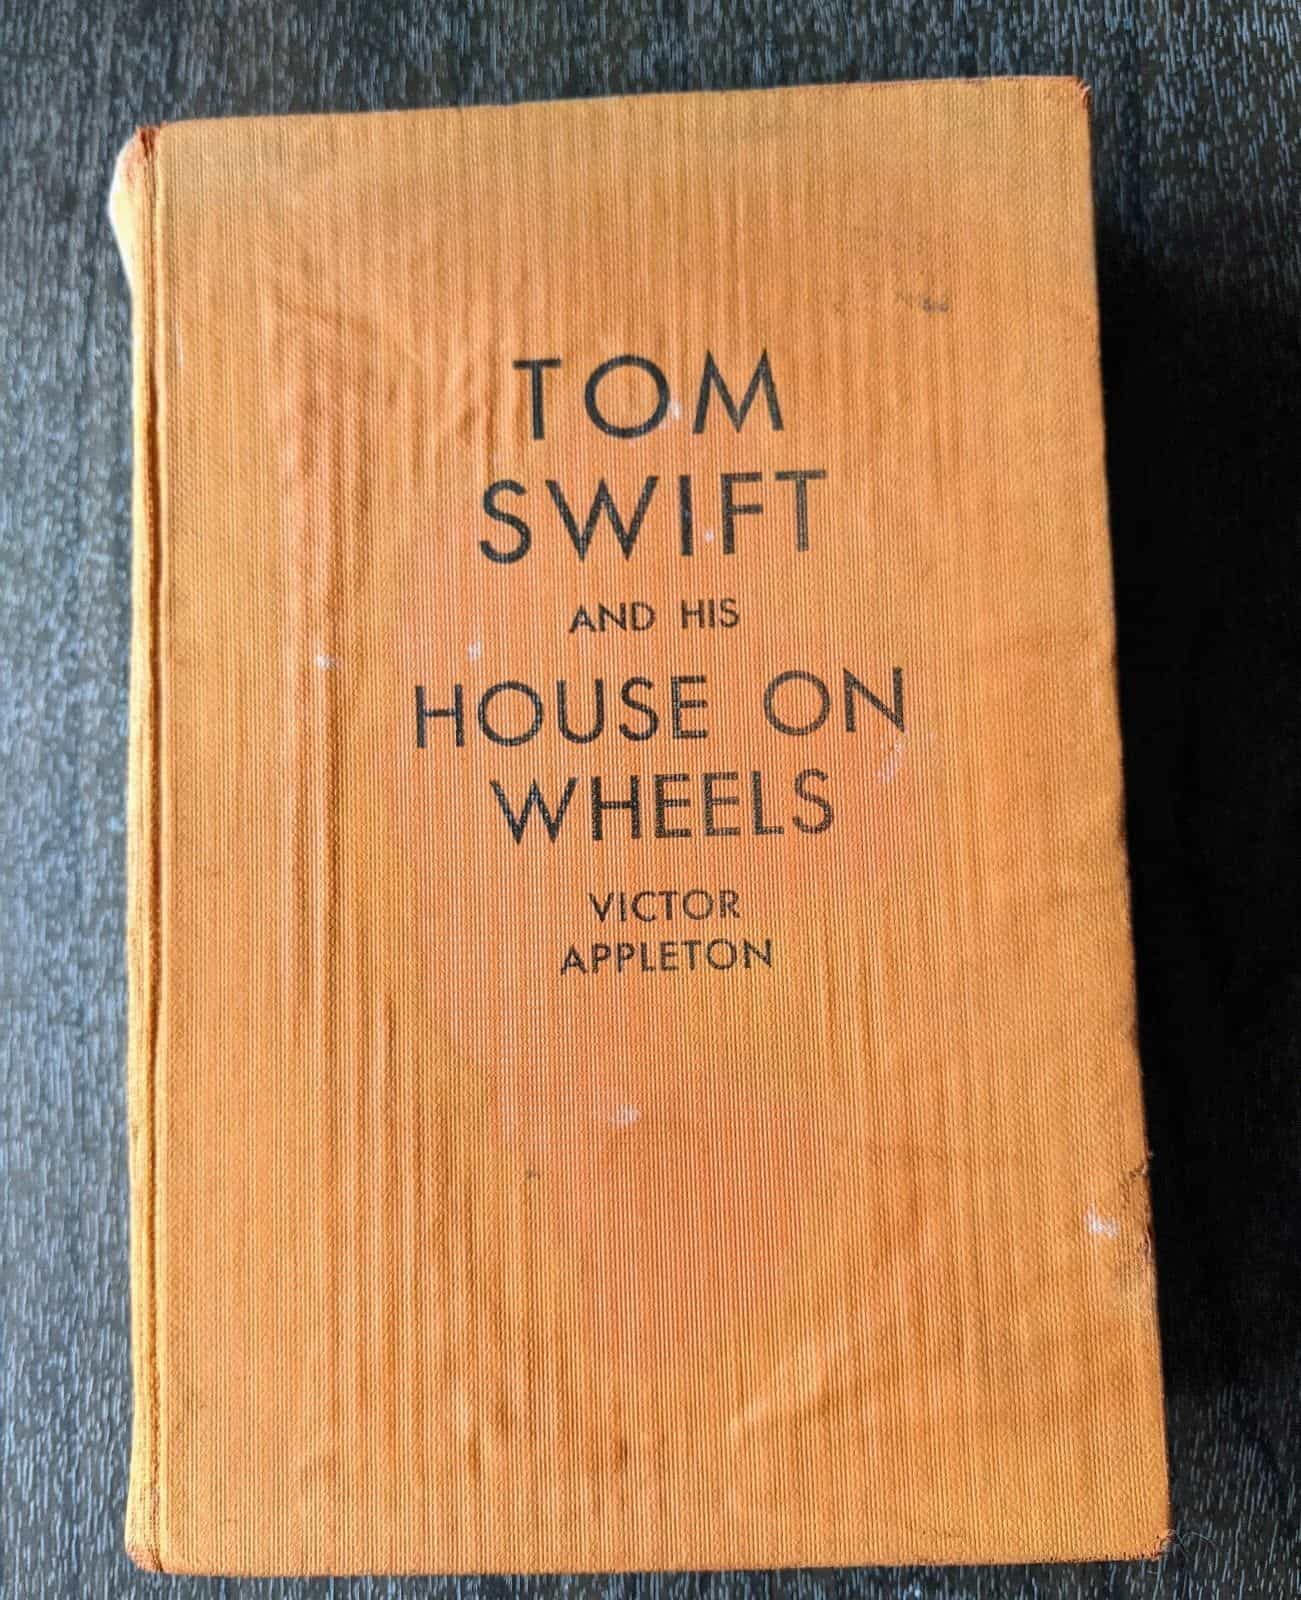 Tom Swift And His House On Wheels by Victor Appleton Antique Book 1929